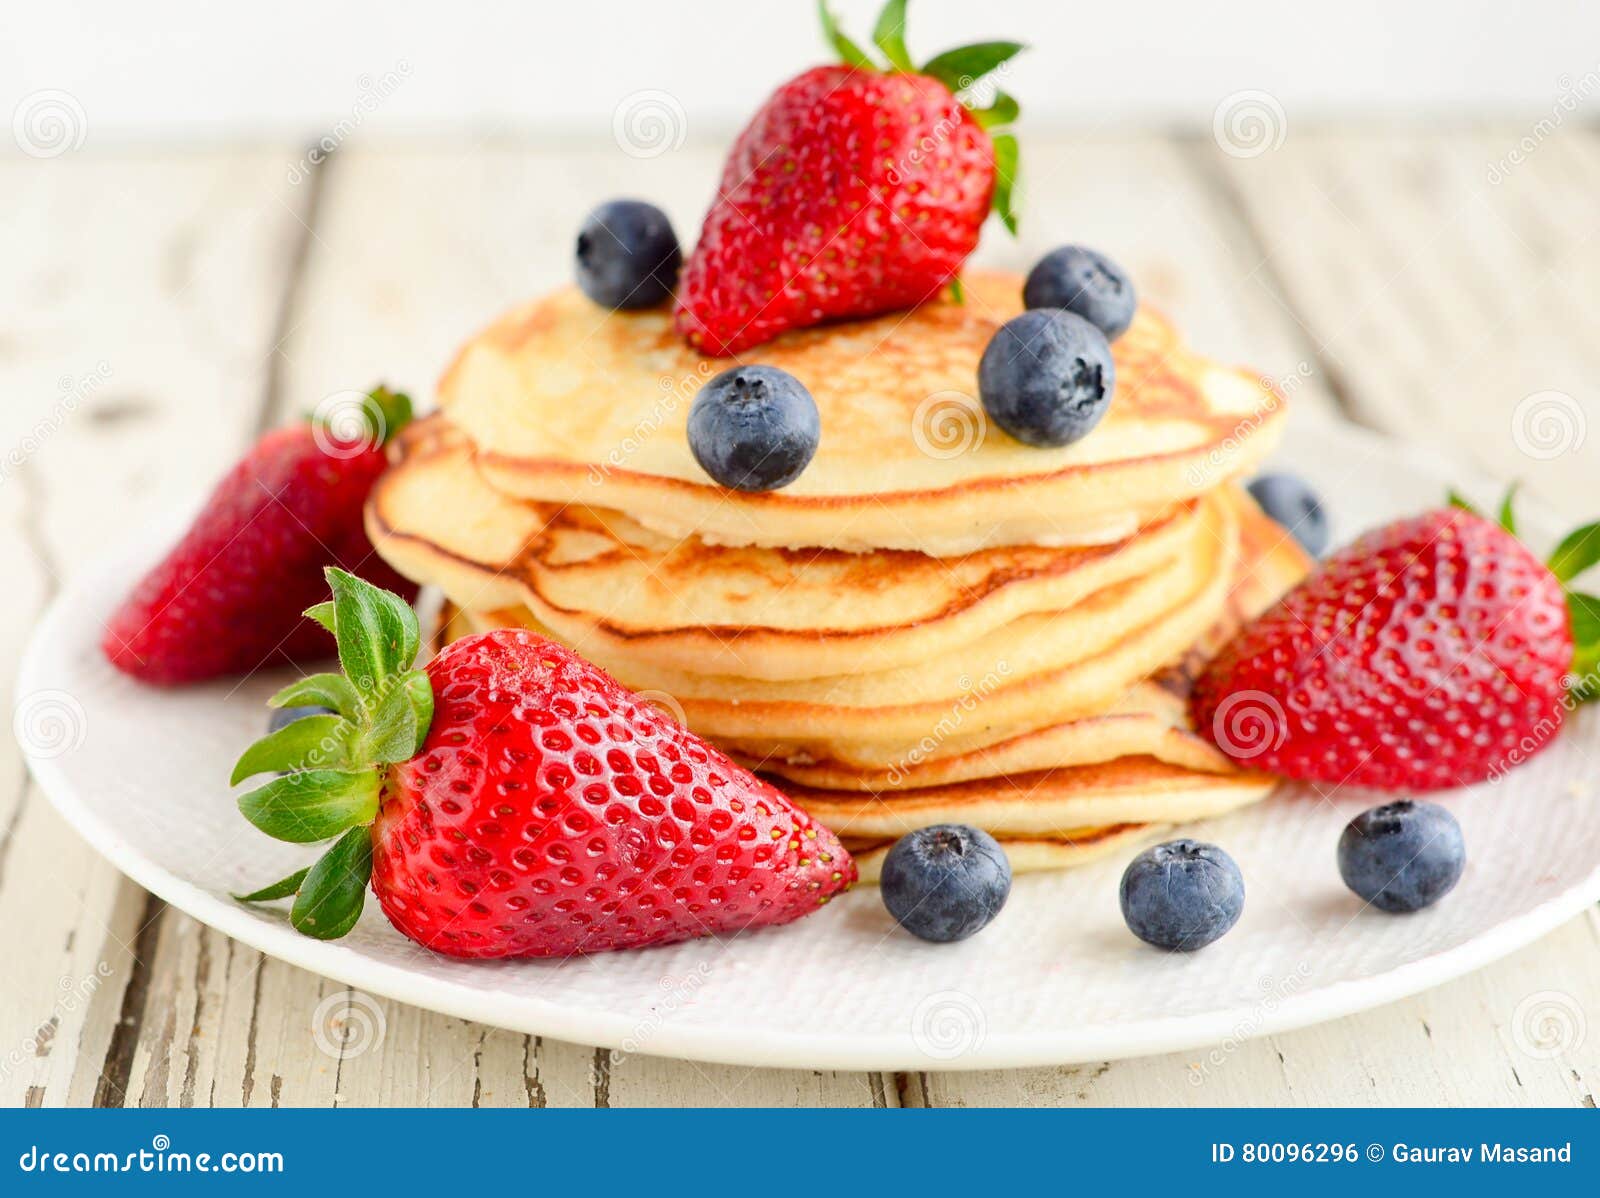 pancakes served with berries